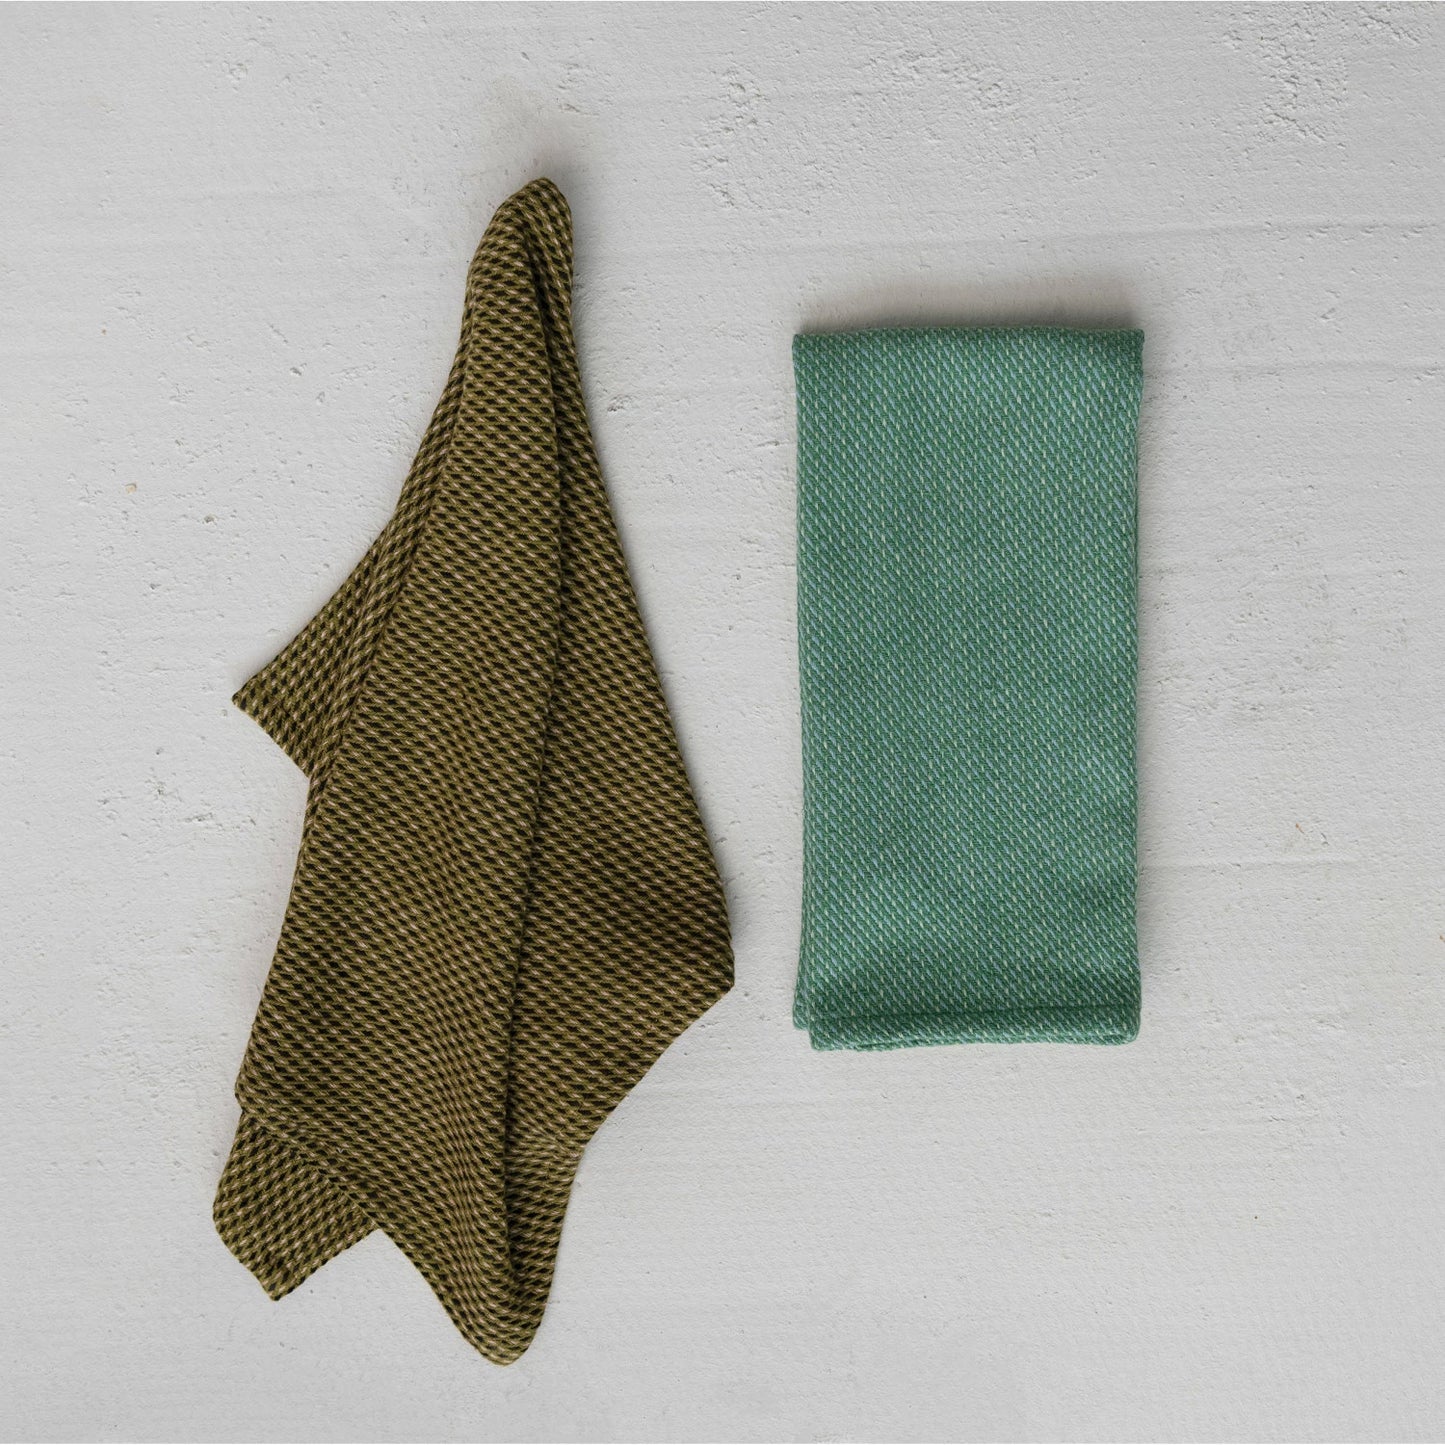 2 dishtowels, 1 olive green and laying in as if on a hook, the other, folded and blue green.